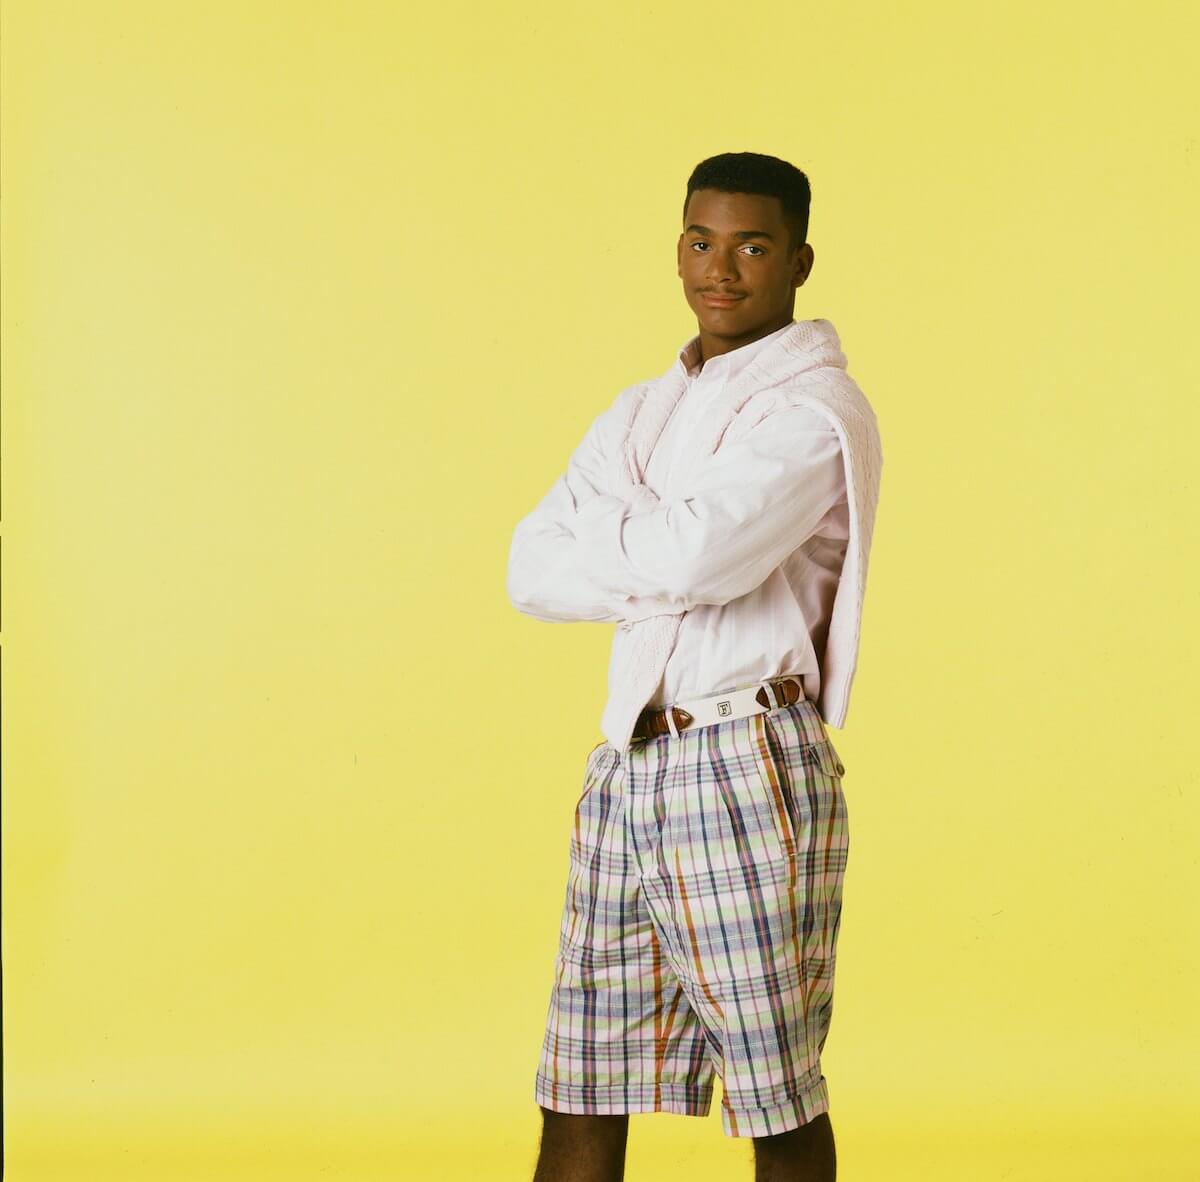 'Fresh Prince of Bel-Air': Alfonso Ribeiro folds his arms